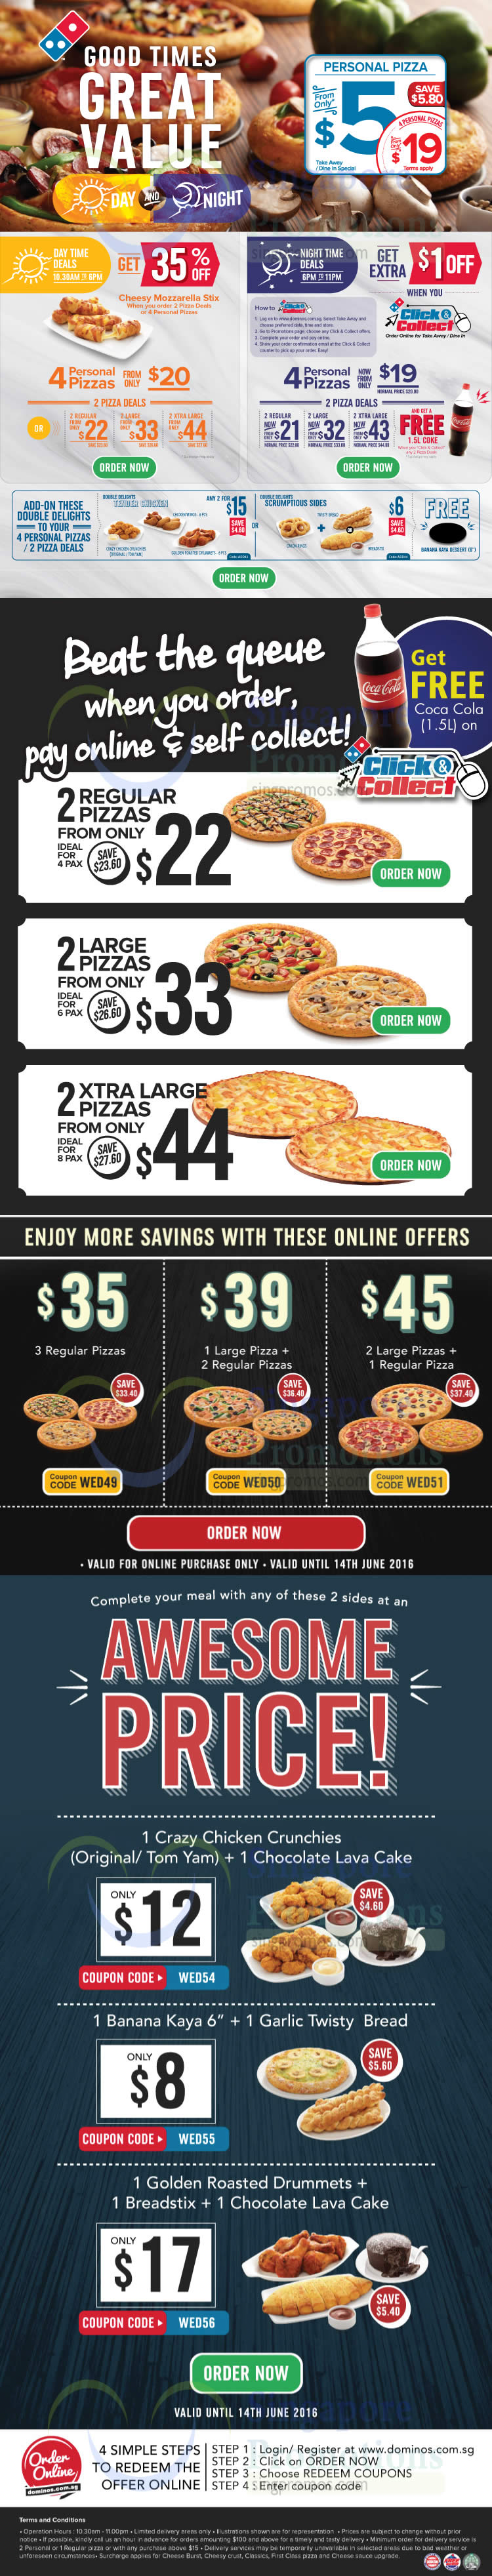 dominos deals coupons